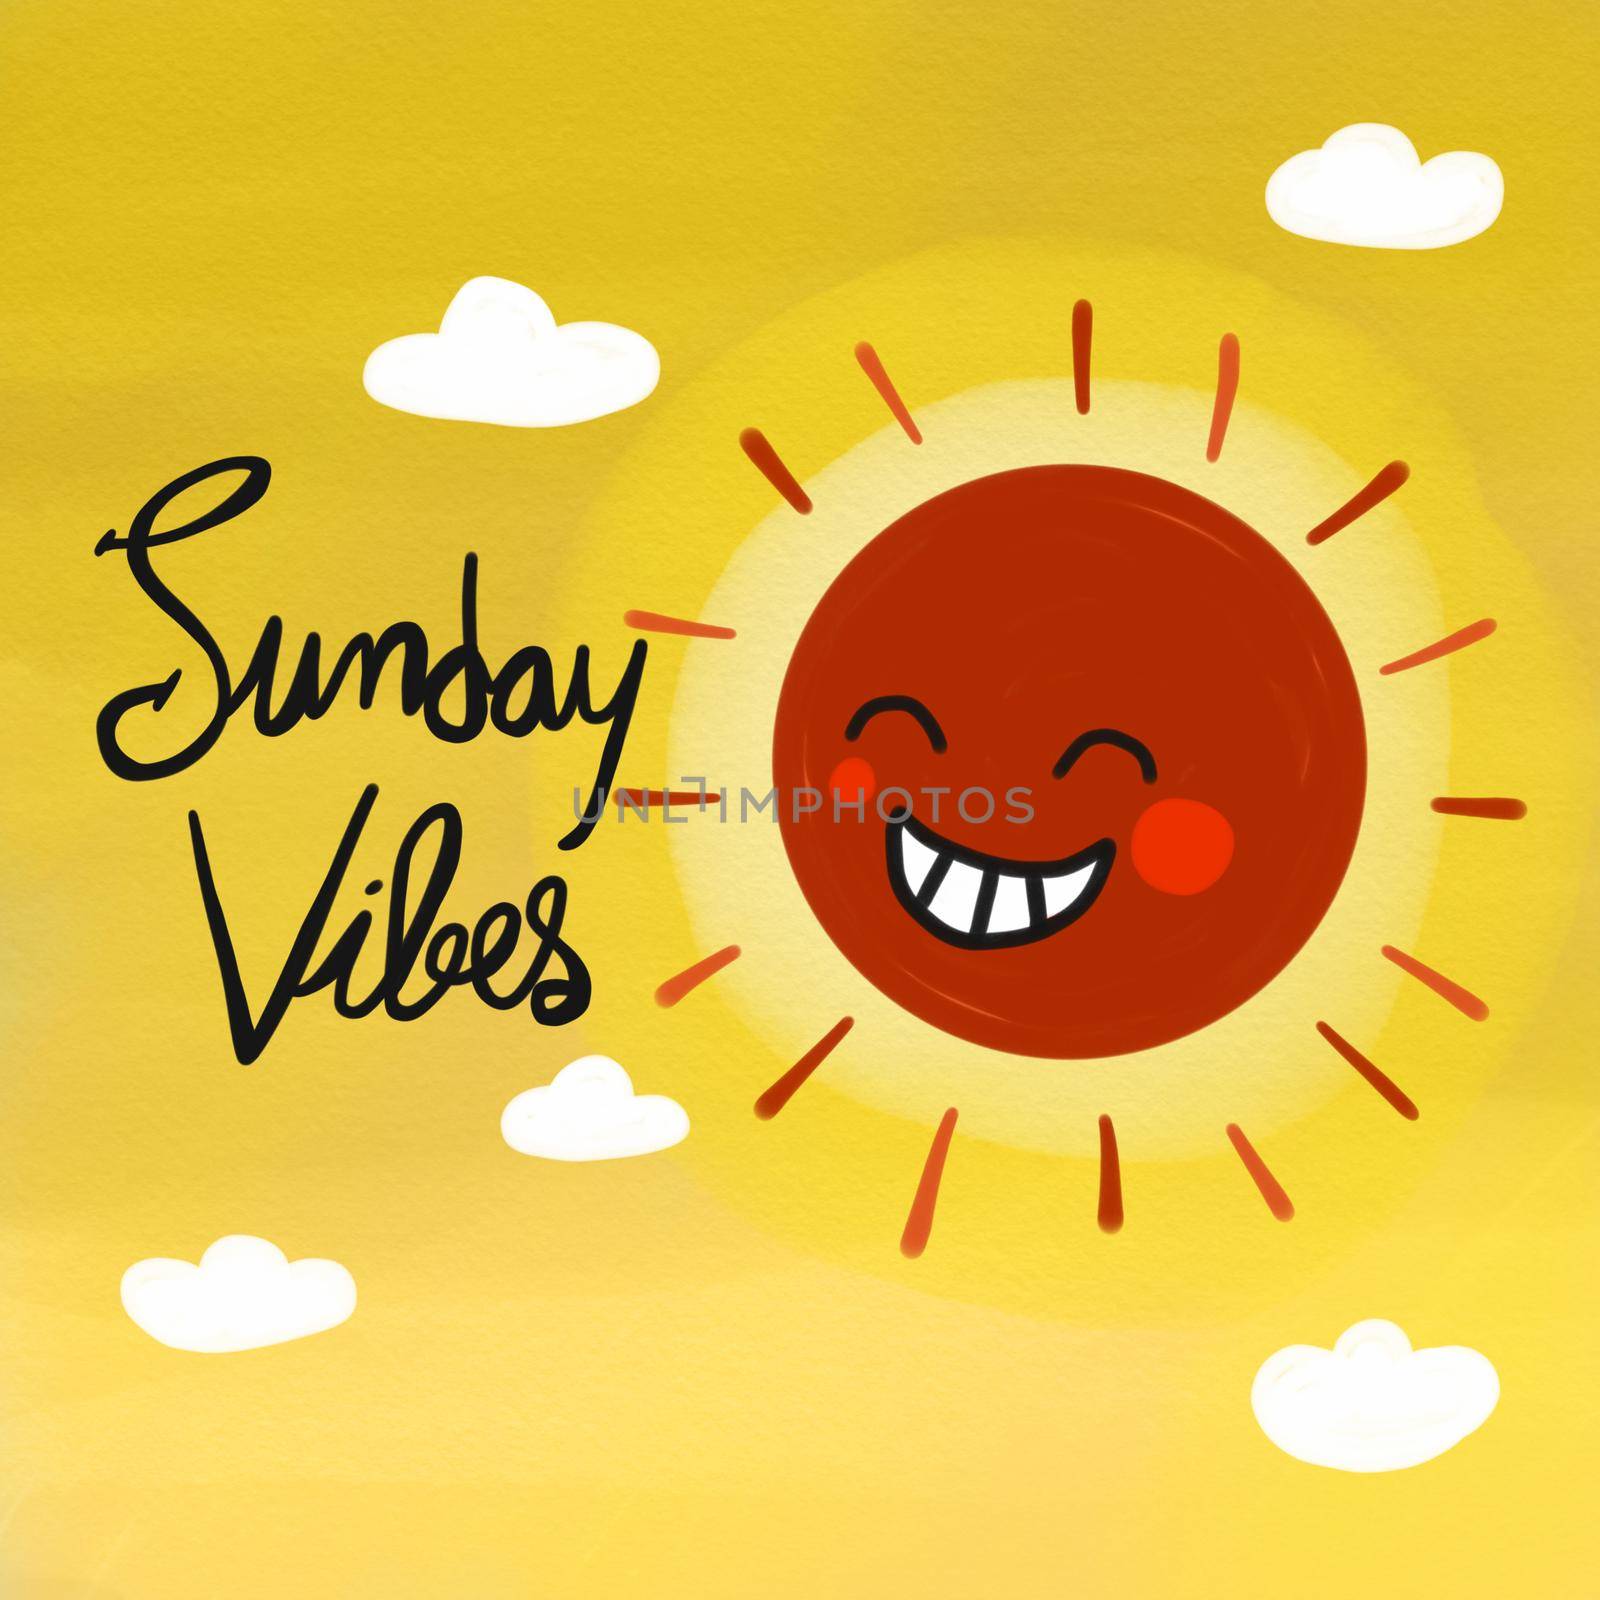 Sunday vibes word and red cute sun smile watercolor painting illustration by Yoopho